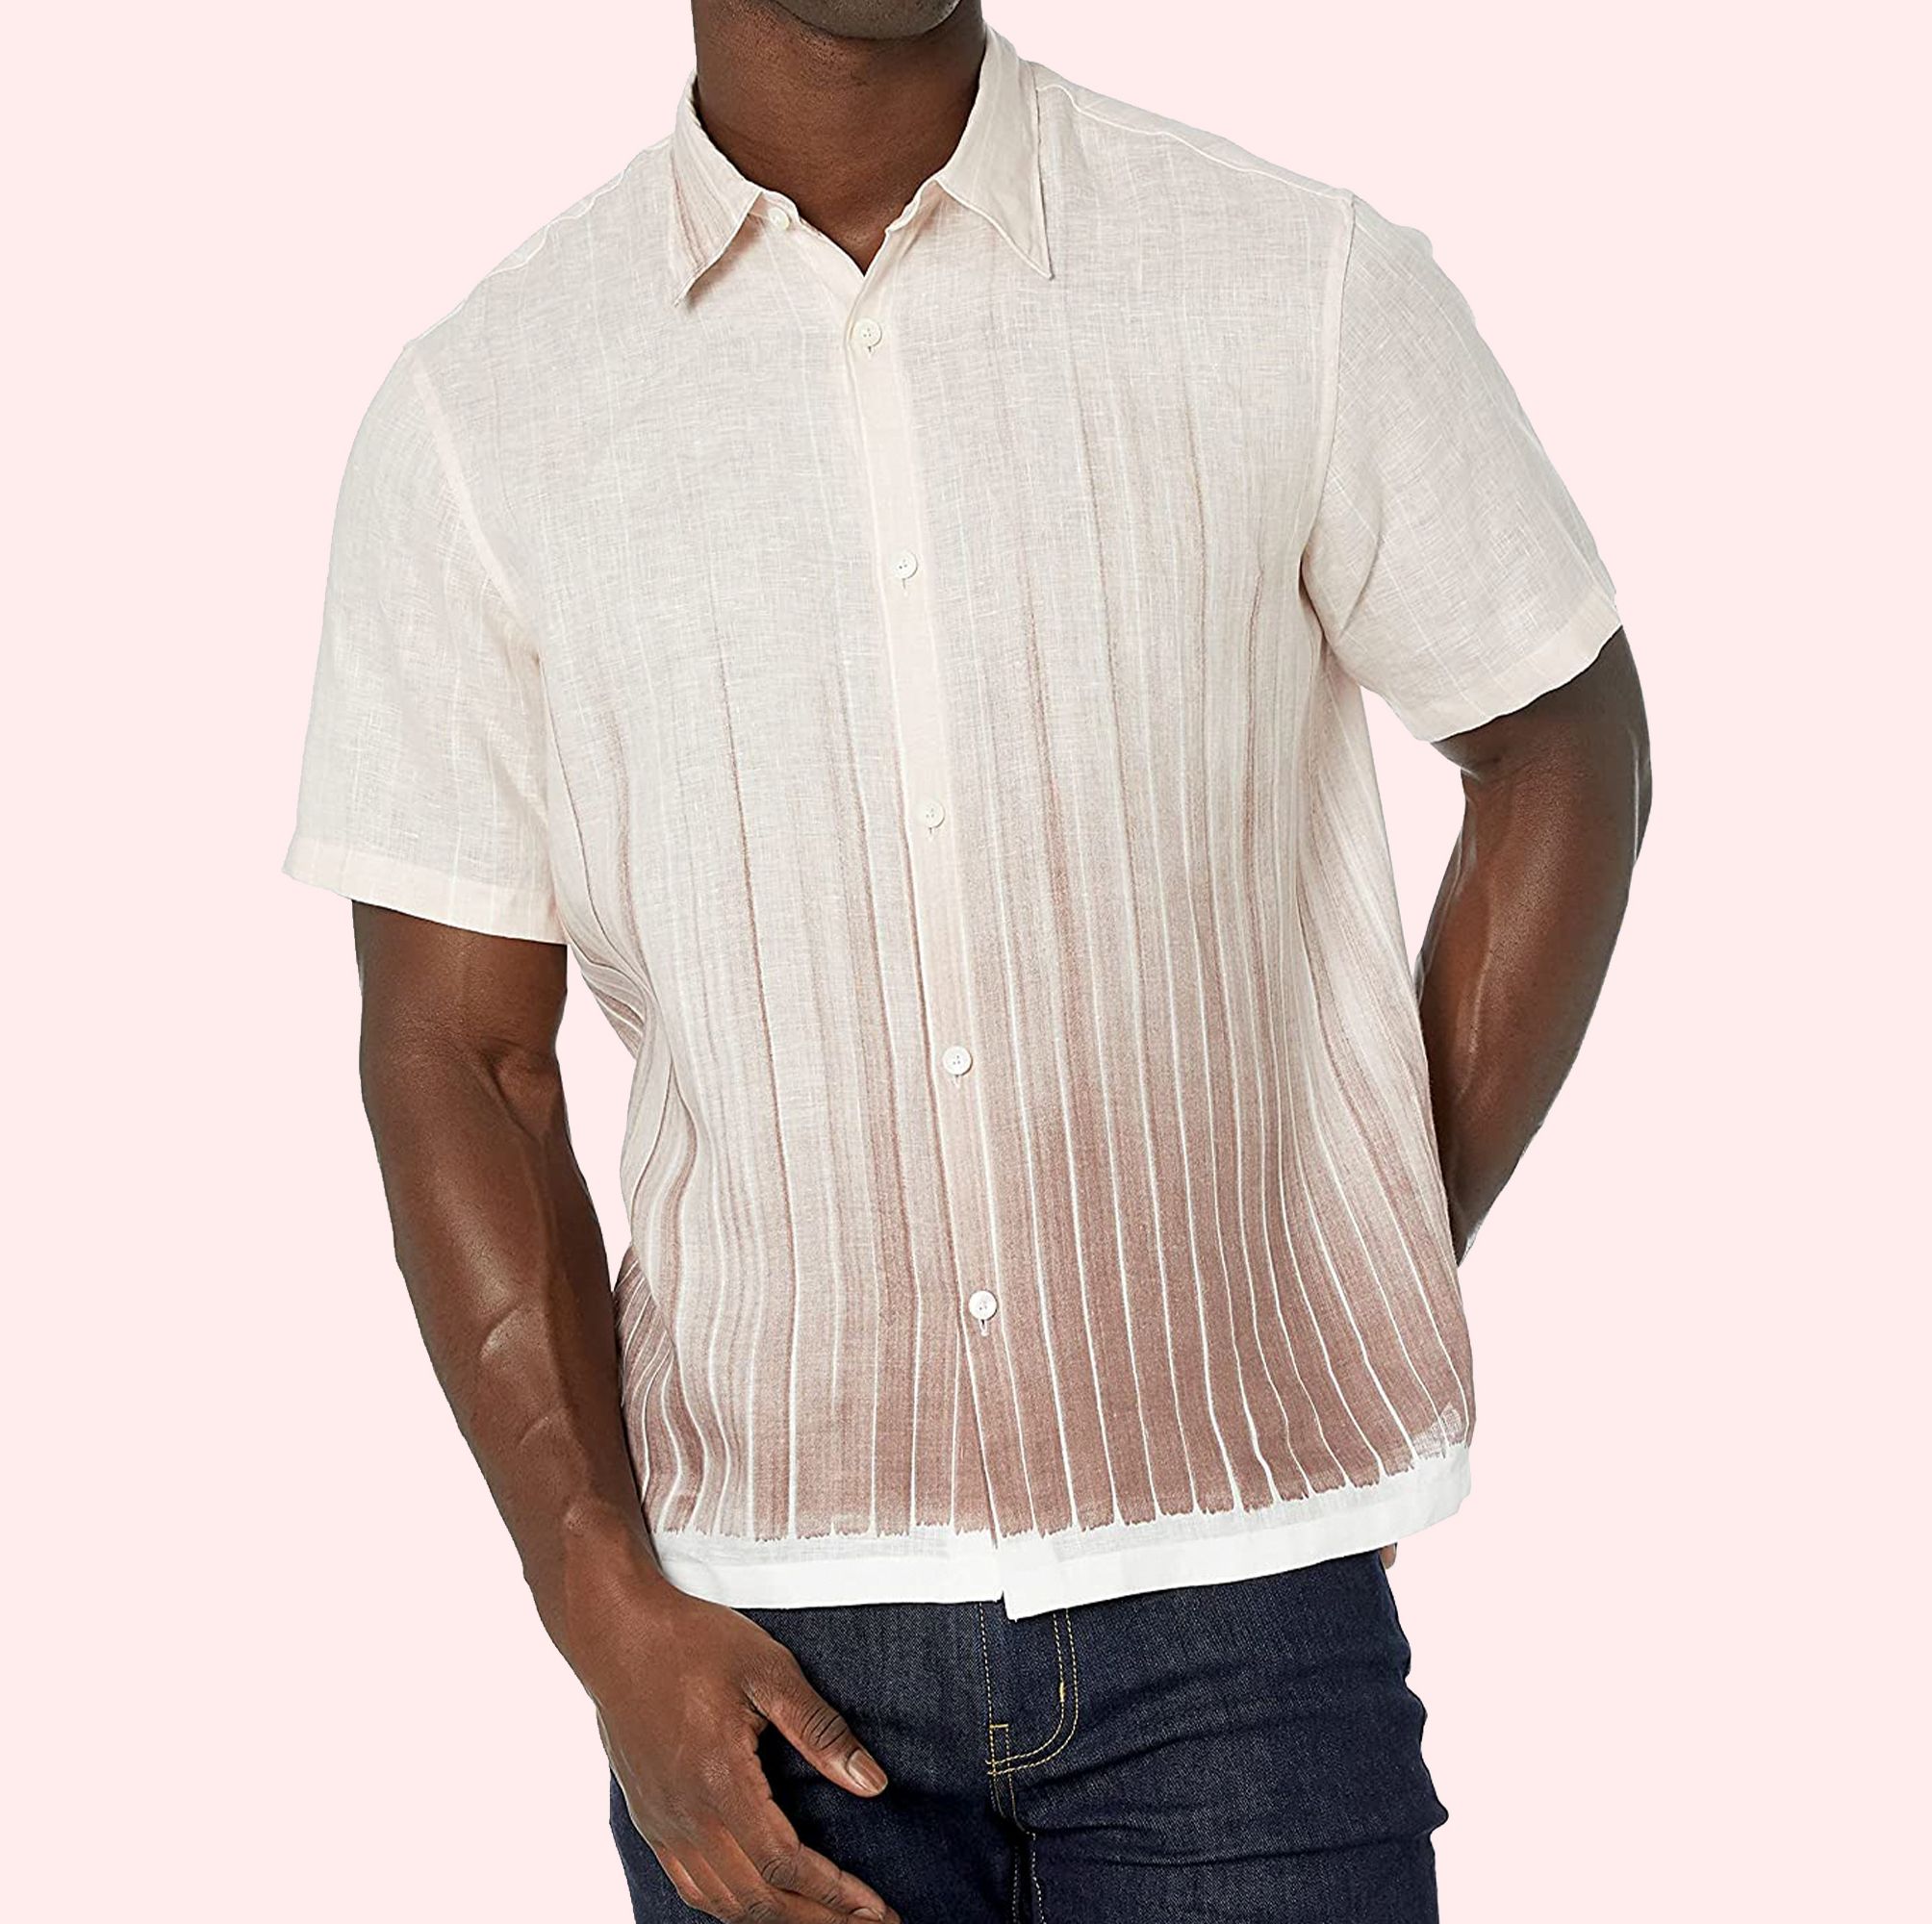 The 21 Best Prime Day Men's Fashion Finds Below $100